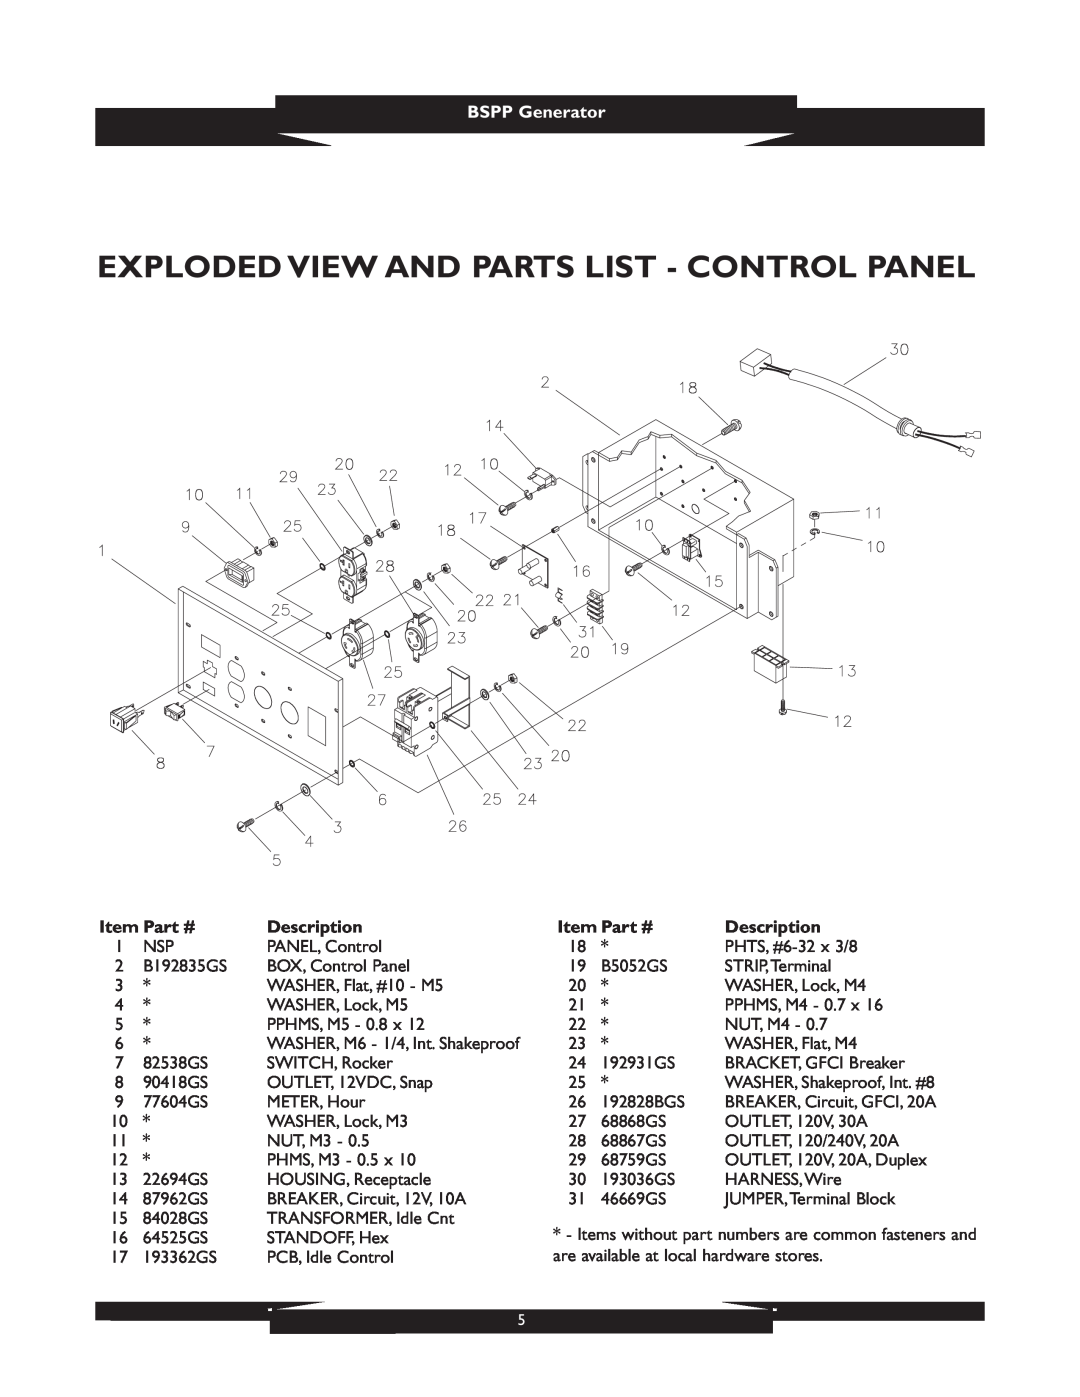 Briggs & Stratton 01933 manual Exploded View And Parts List - Control Panel, BSPP Generator, Item Part #, Description 